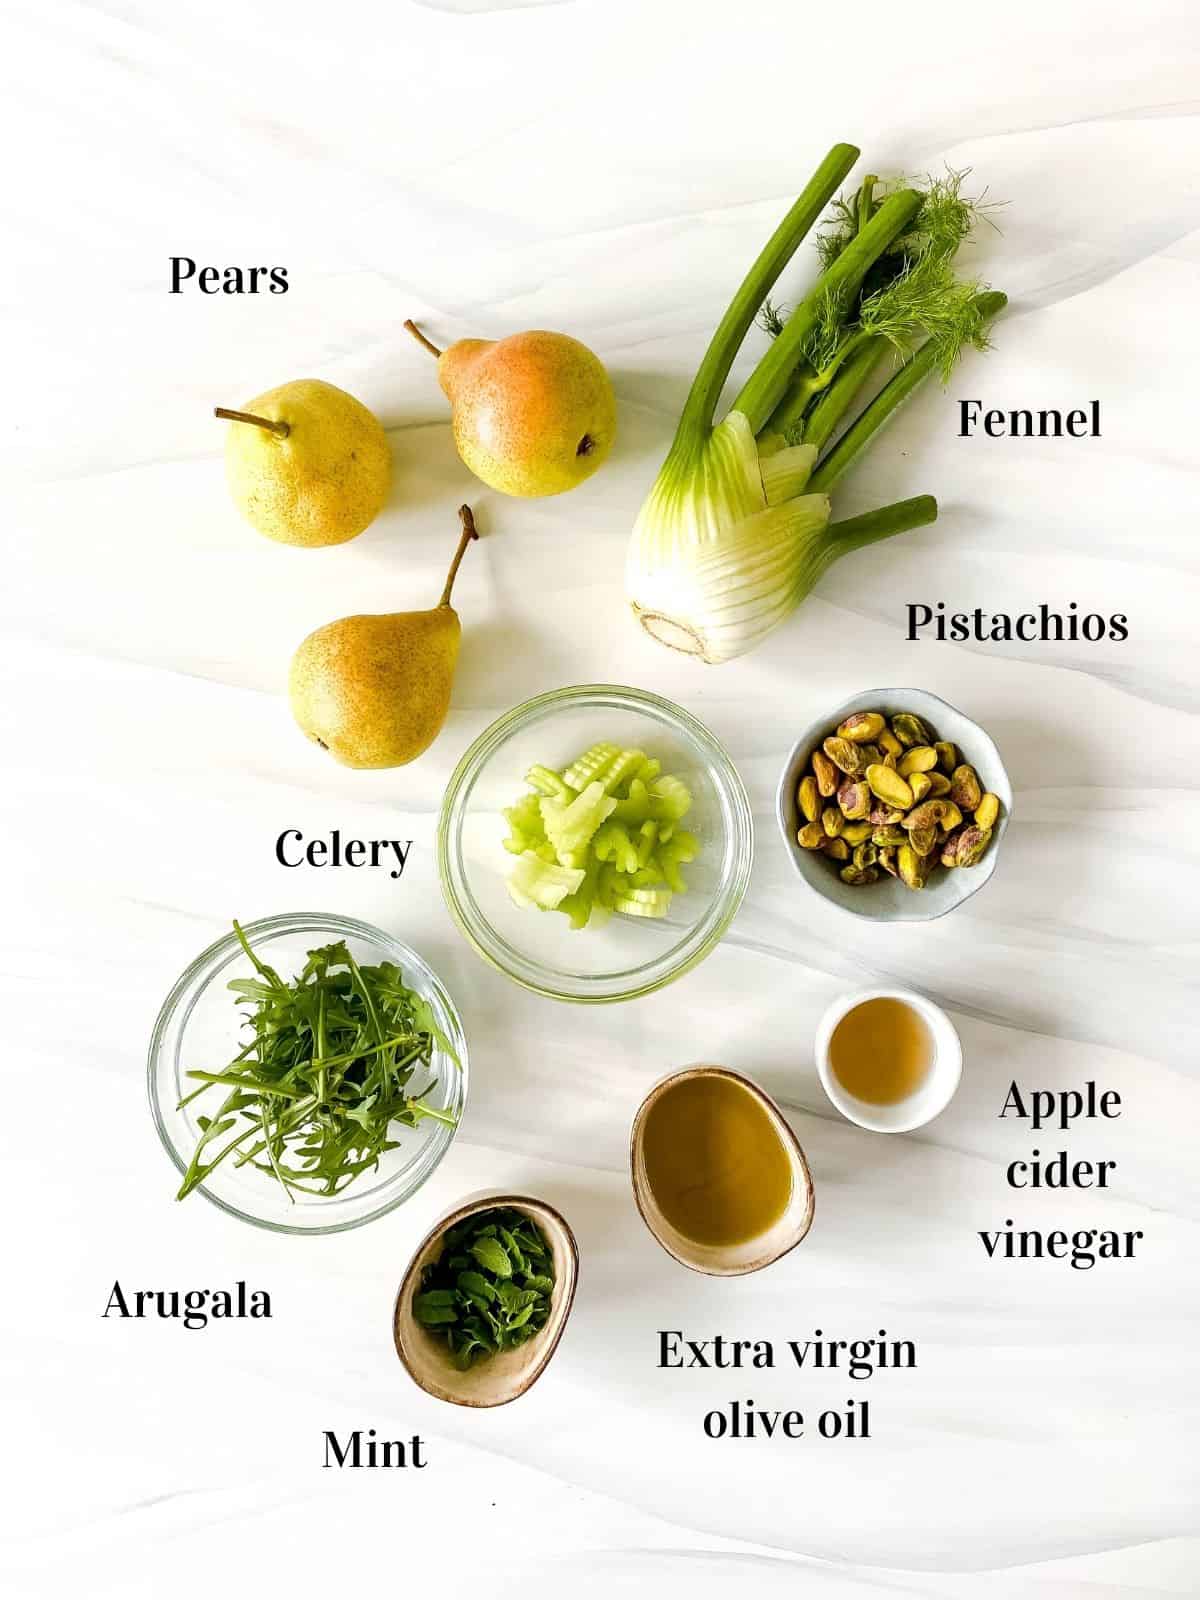 all the ingredients to make pear and fennel salad.